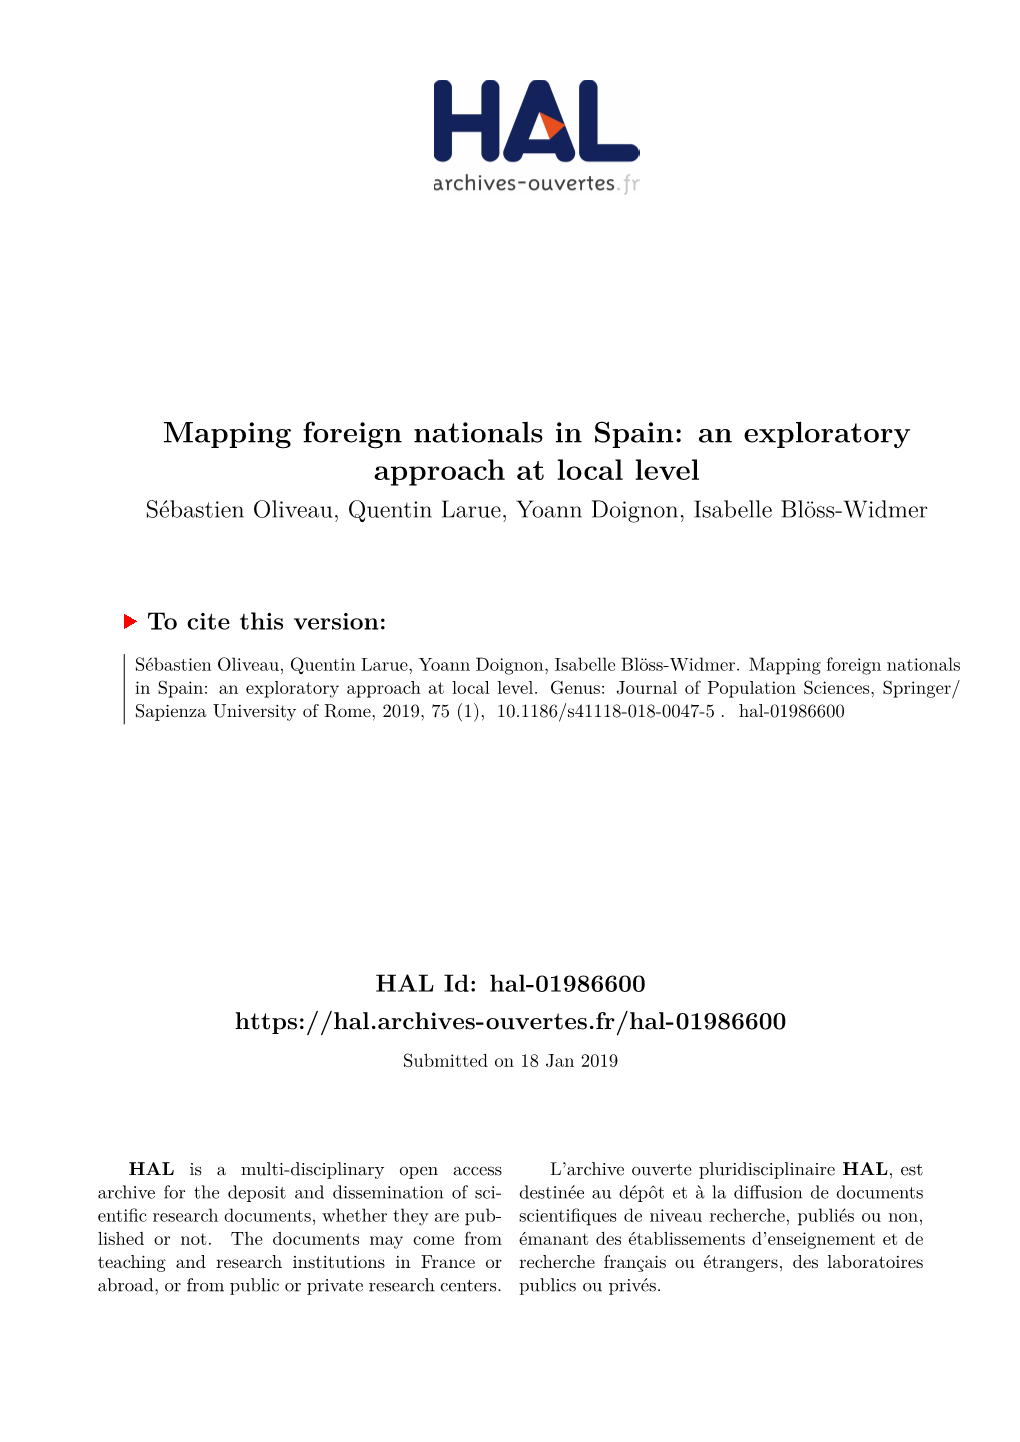 Mapping Foreign Nationals in Spain: an Exploratory Approach at Local Level Sébastien Oliveau, Quentin Larue, Yoann Doignon, Isabelle Blöss-Widmer